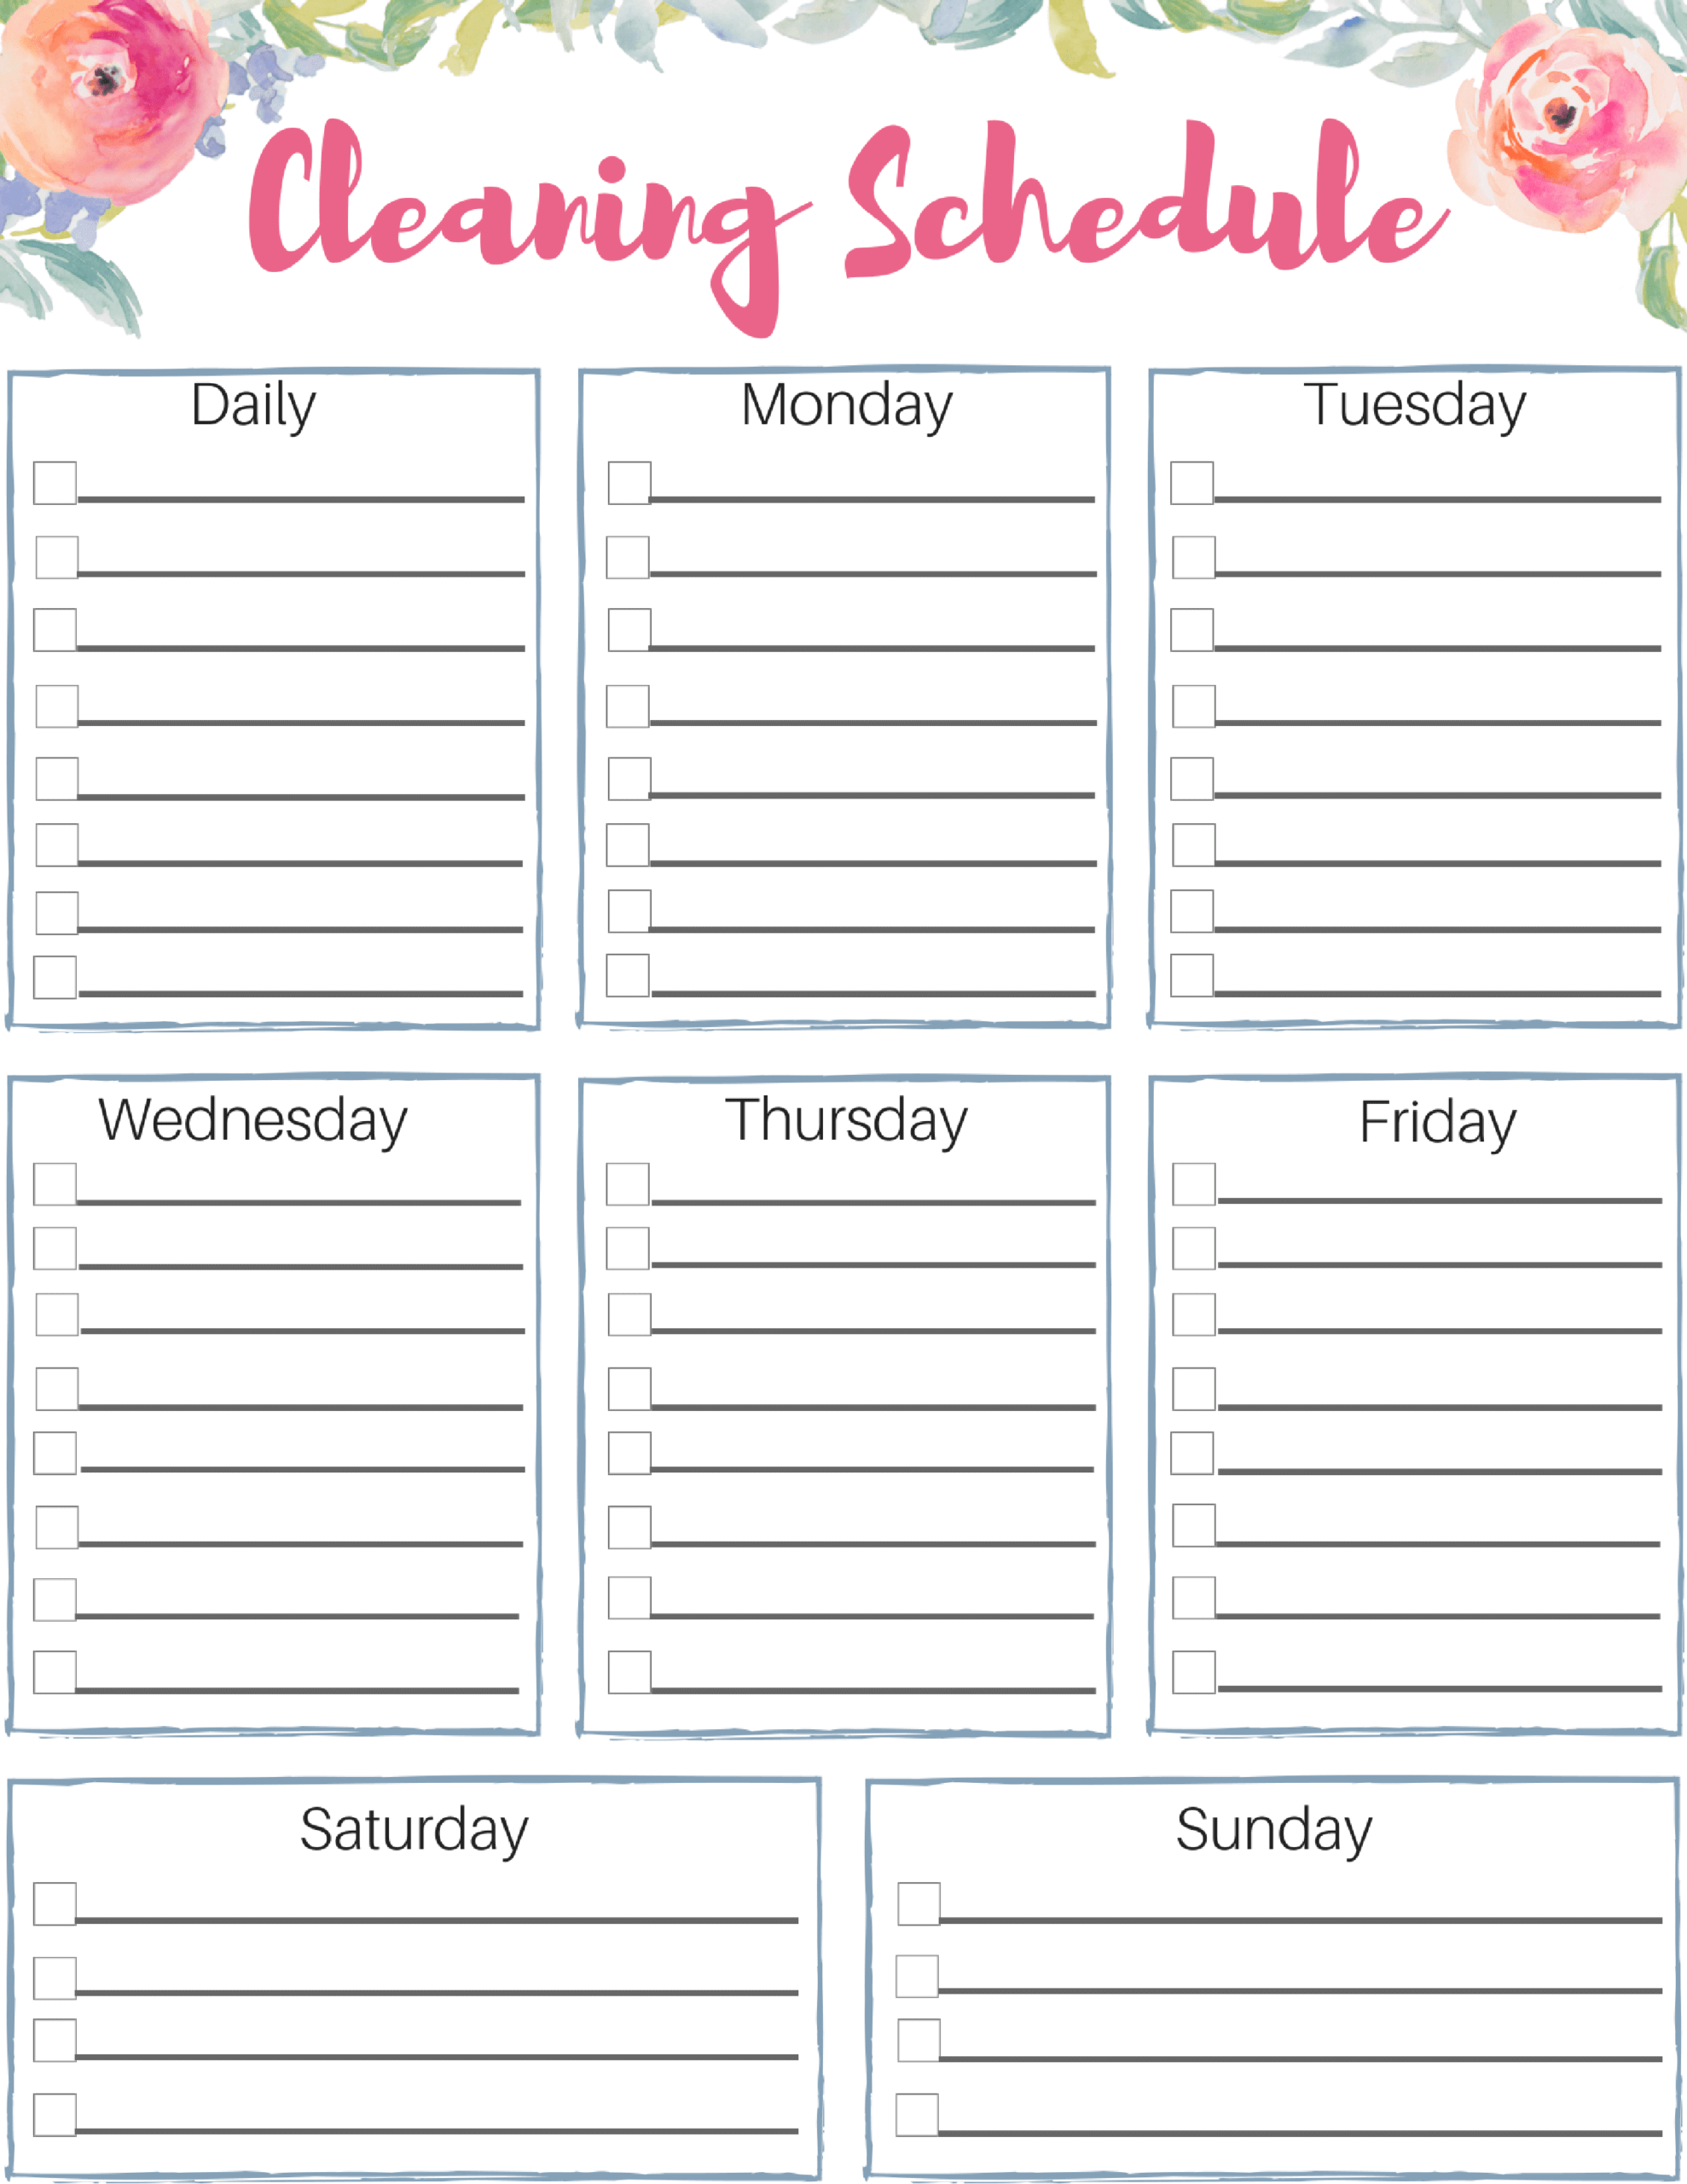 impressive-editable-cleaning-schedule-template-ideas-weekly-in-blank-cleaning-schedule-template